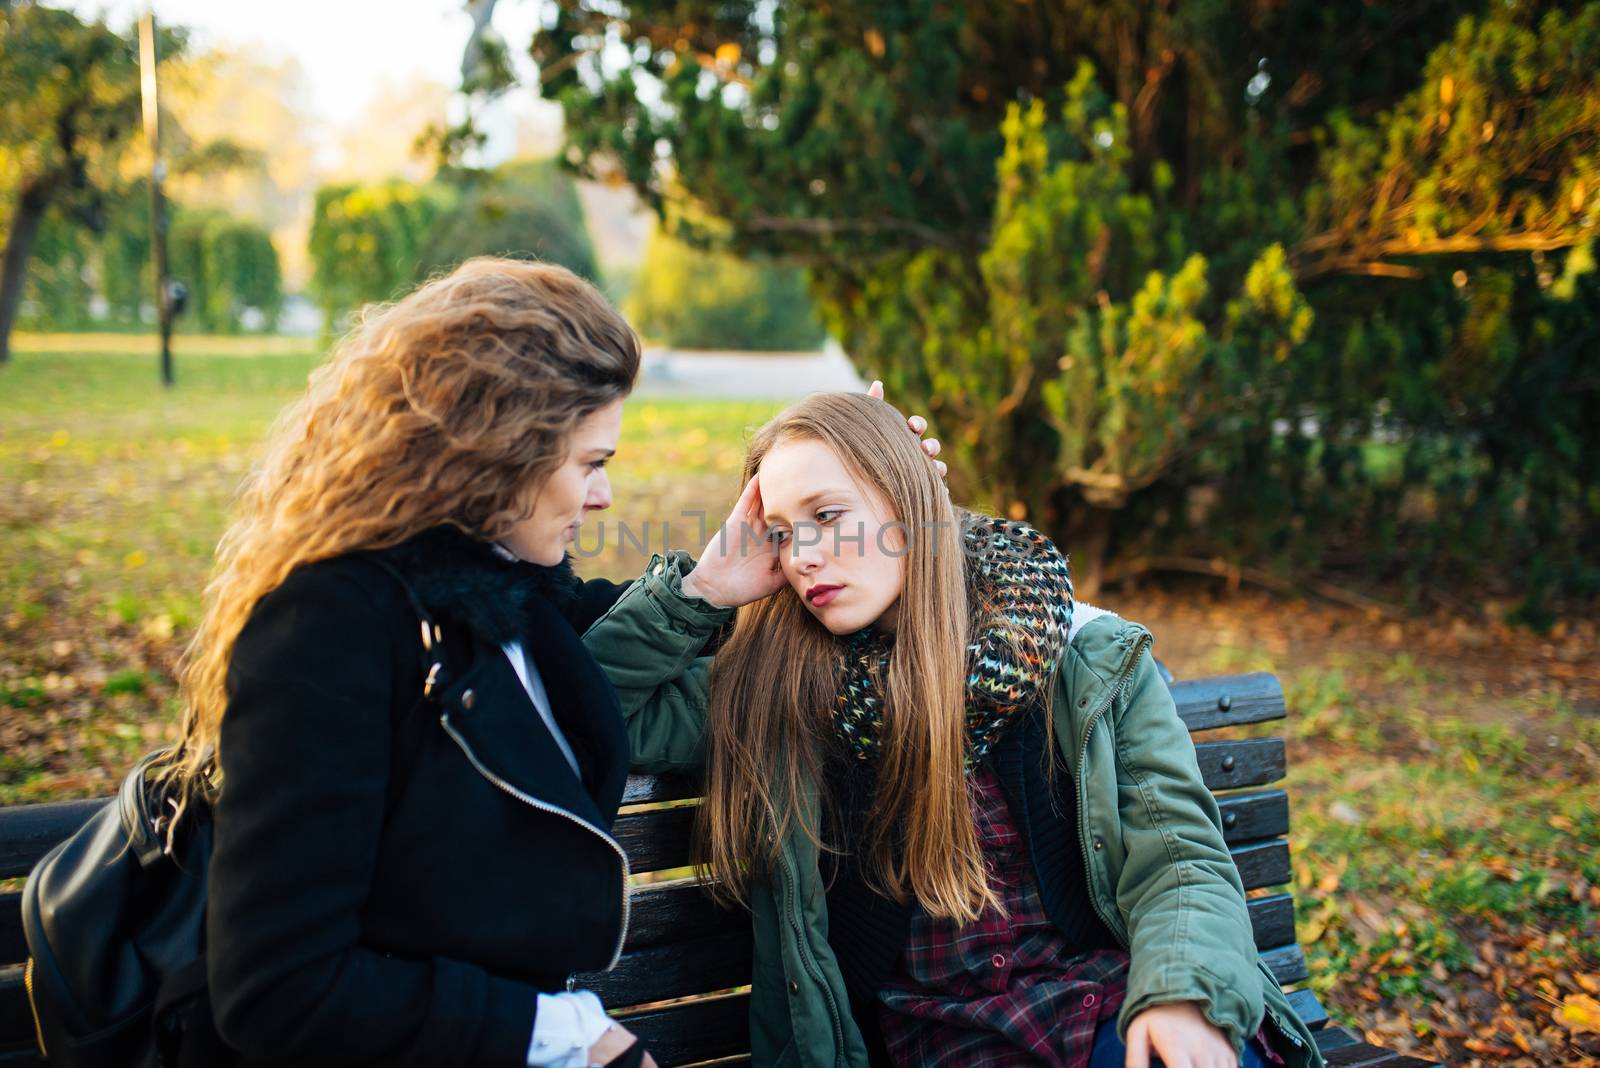 Sad attractive girl sitting on the bench in the park while her female friend is consoling her.